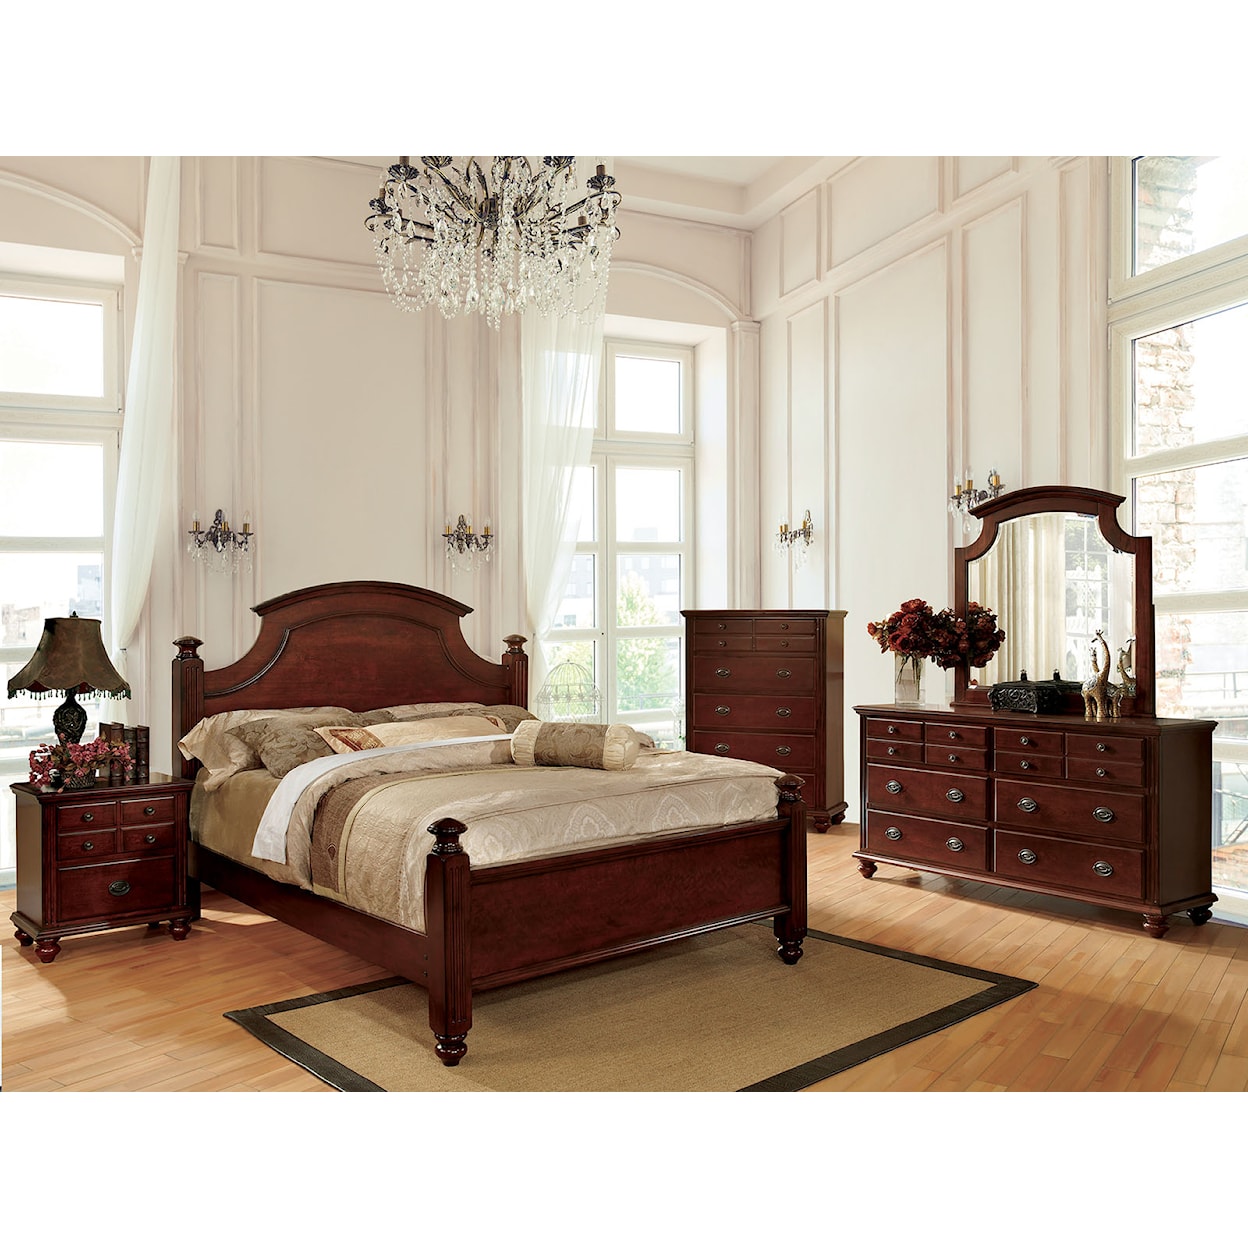 Furniture of America Gabrielle 5 Pc. Queen Bedroom Set w/ Chest